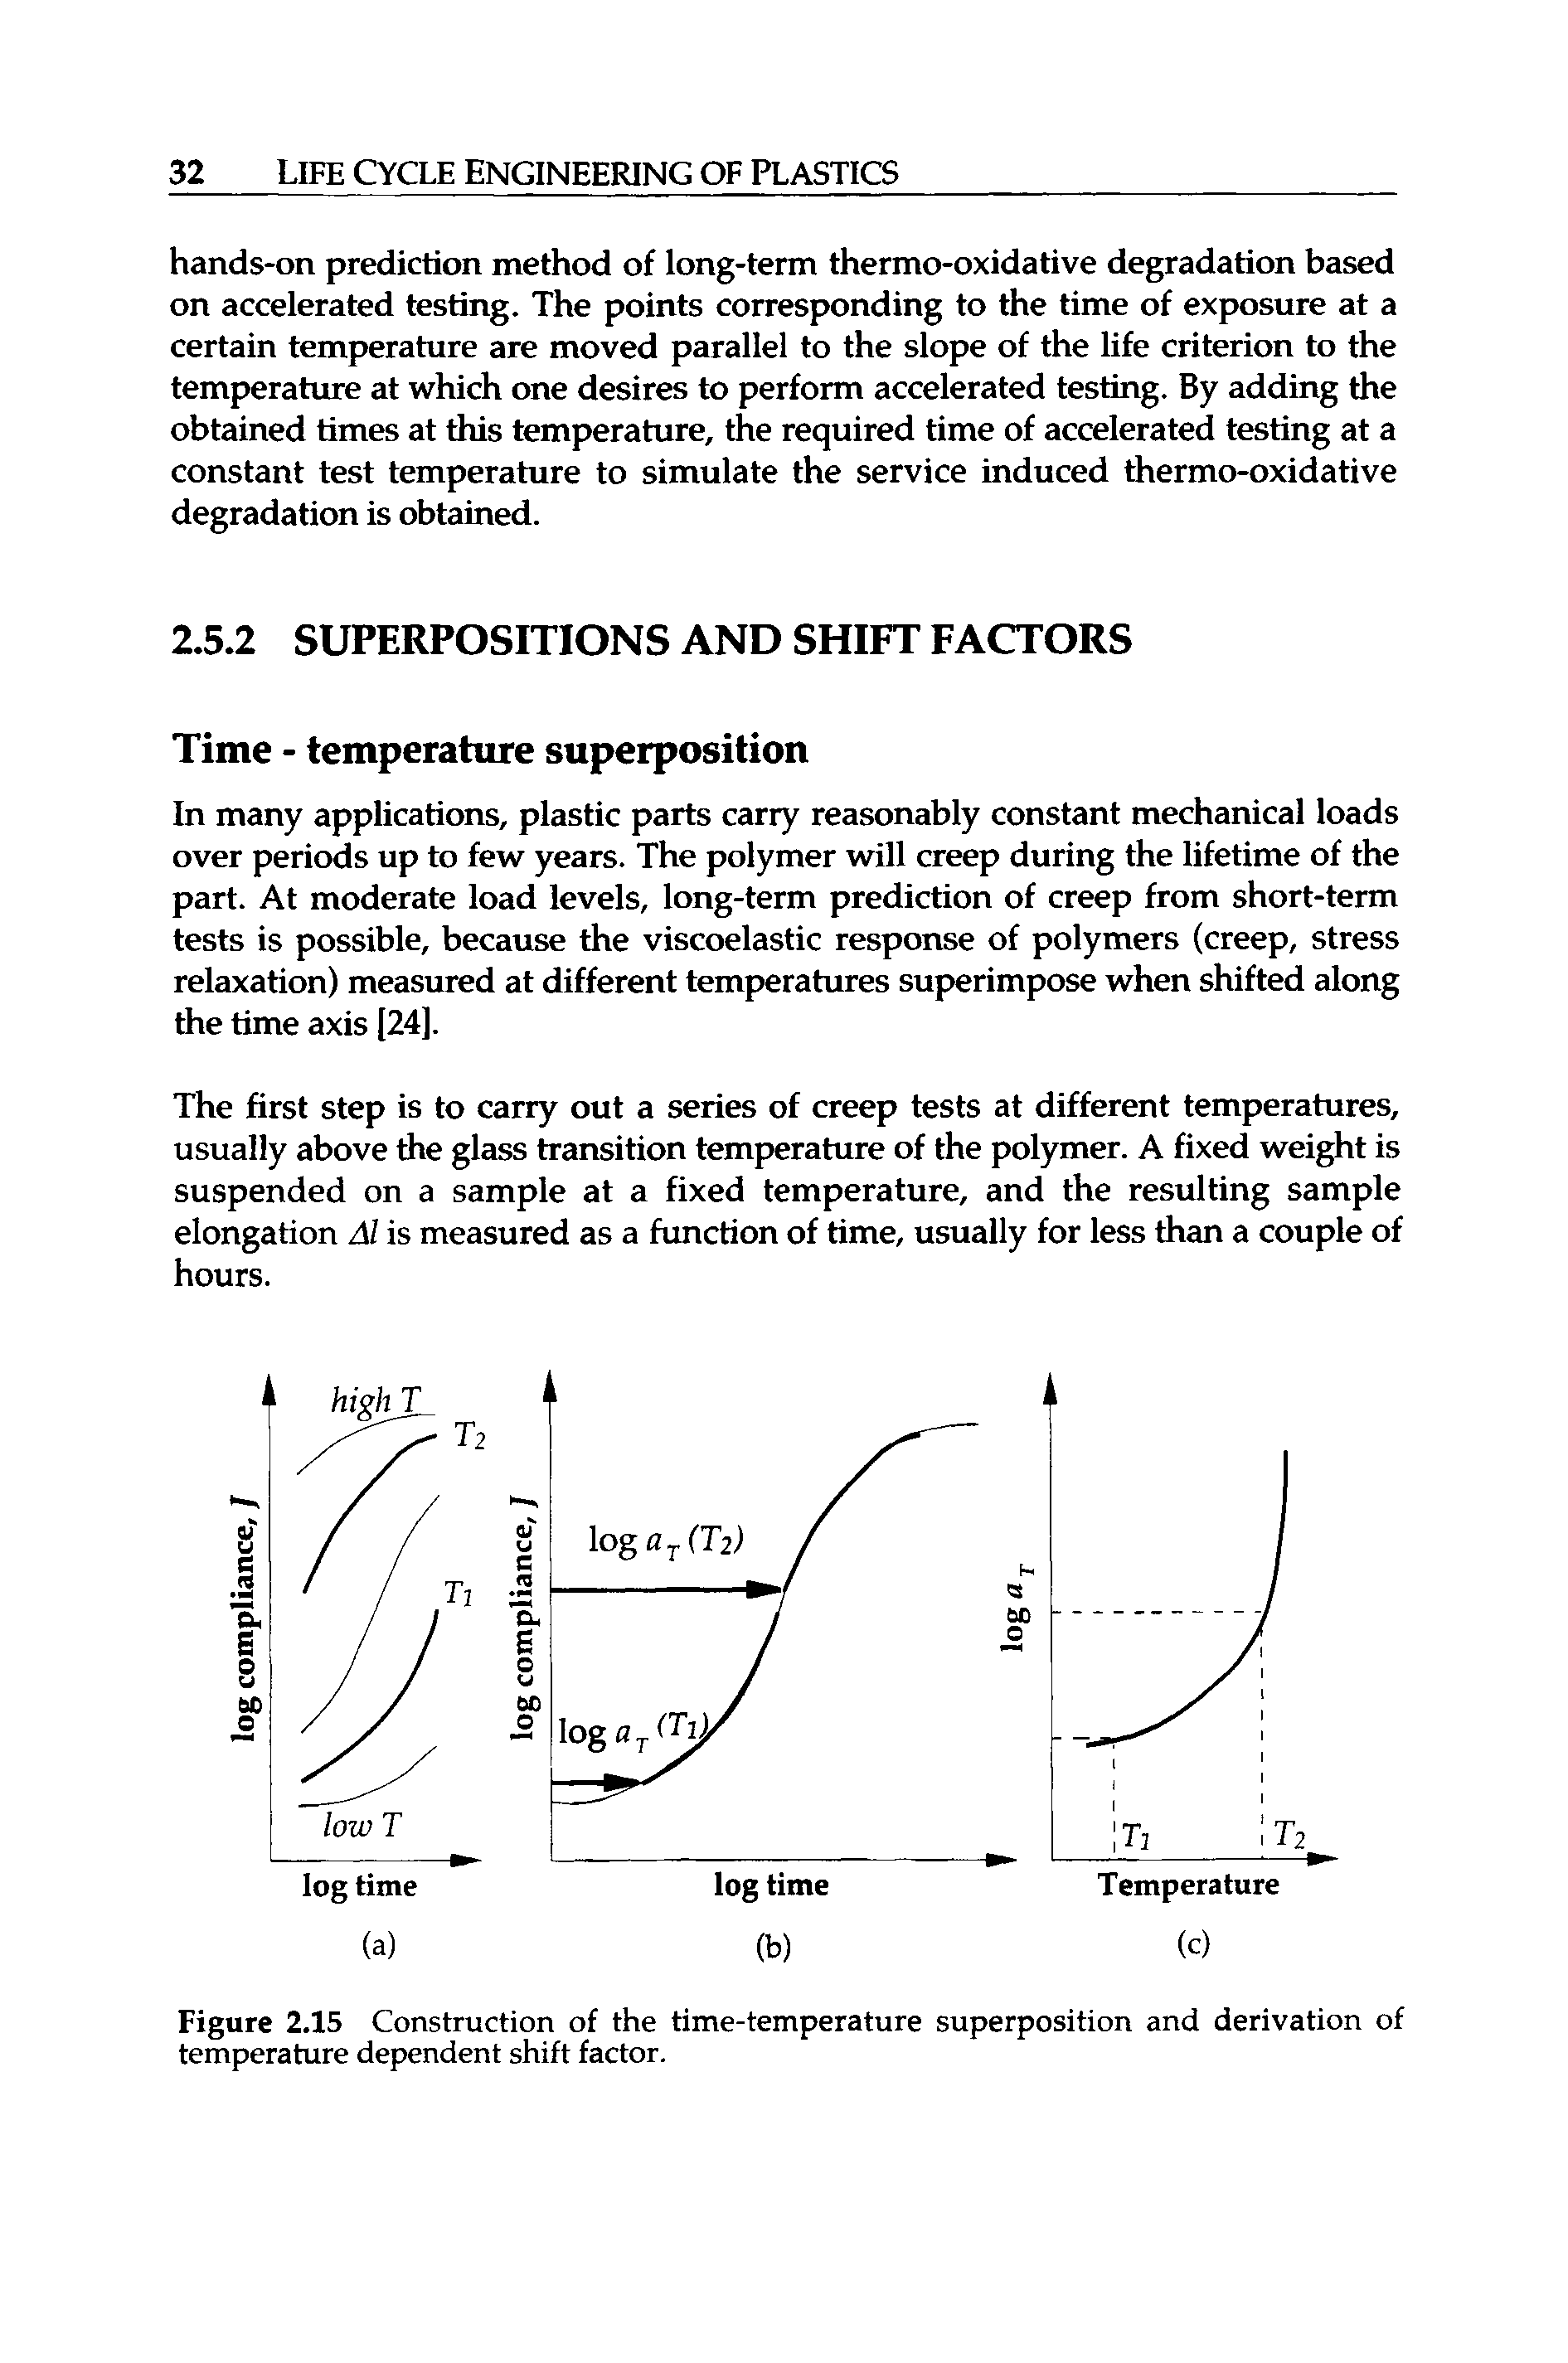 Figure 2.15 Construction of the time-temperature superposition and derivation of temperature dependent shift factor.